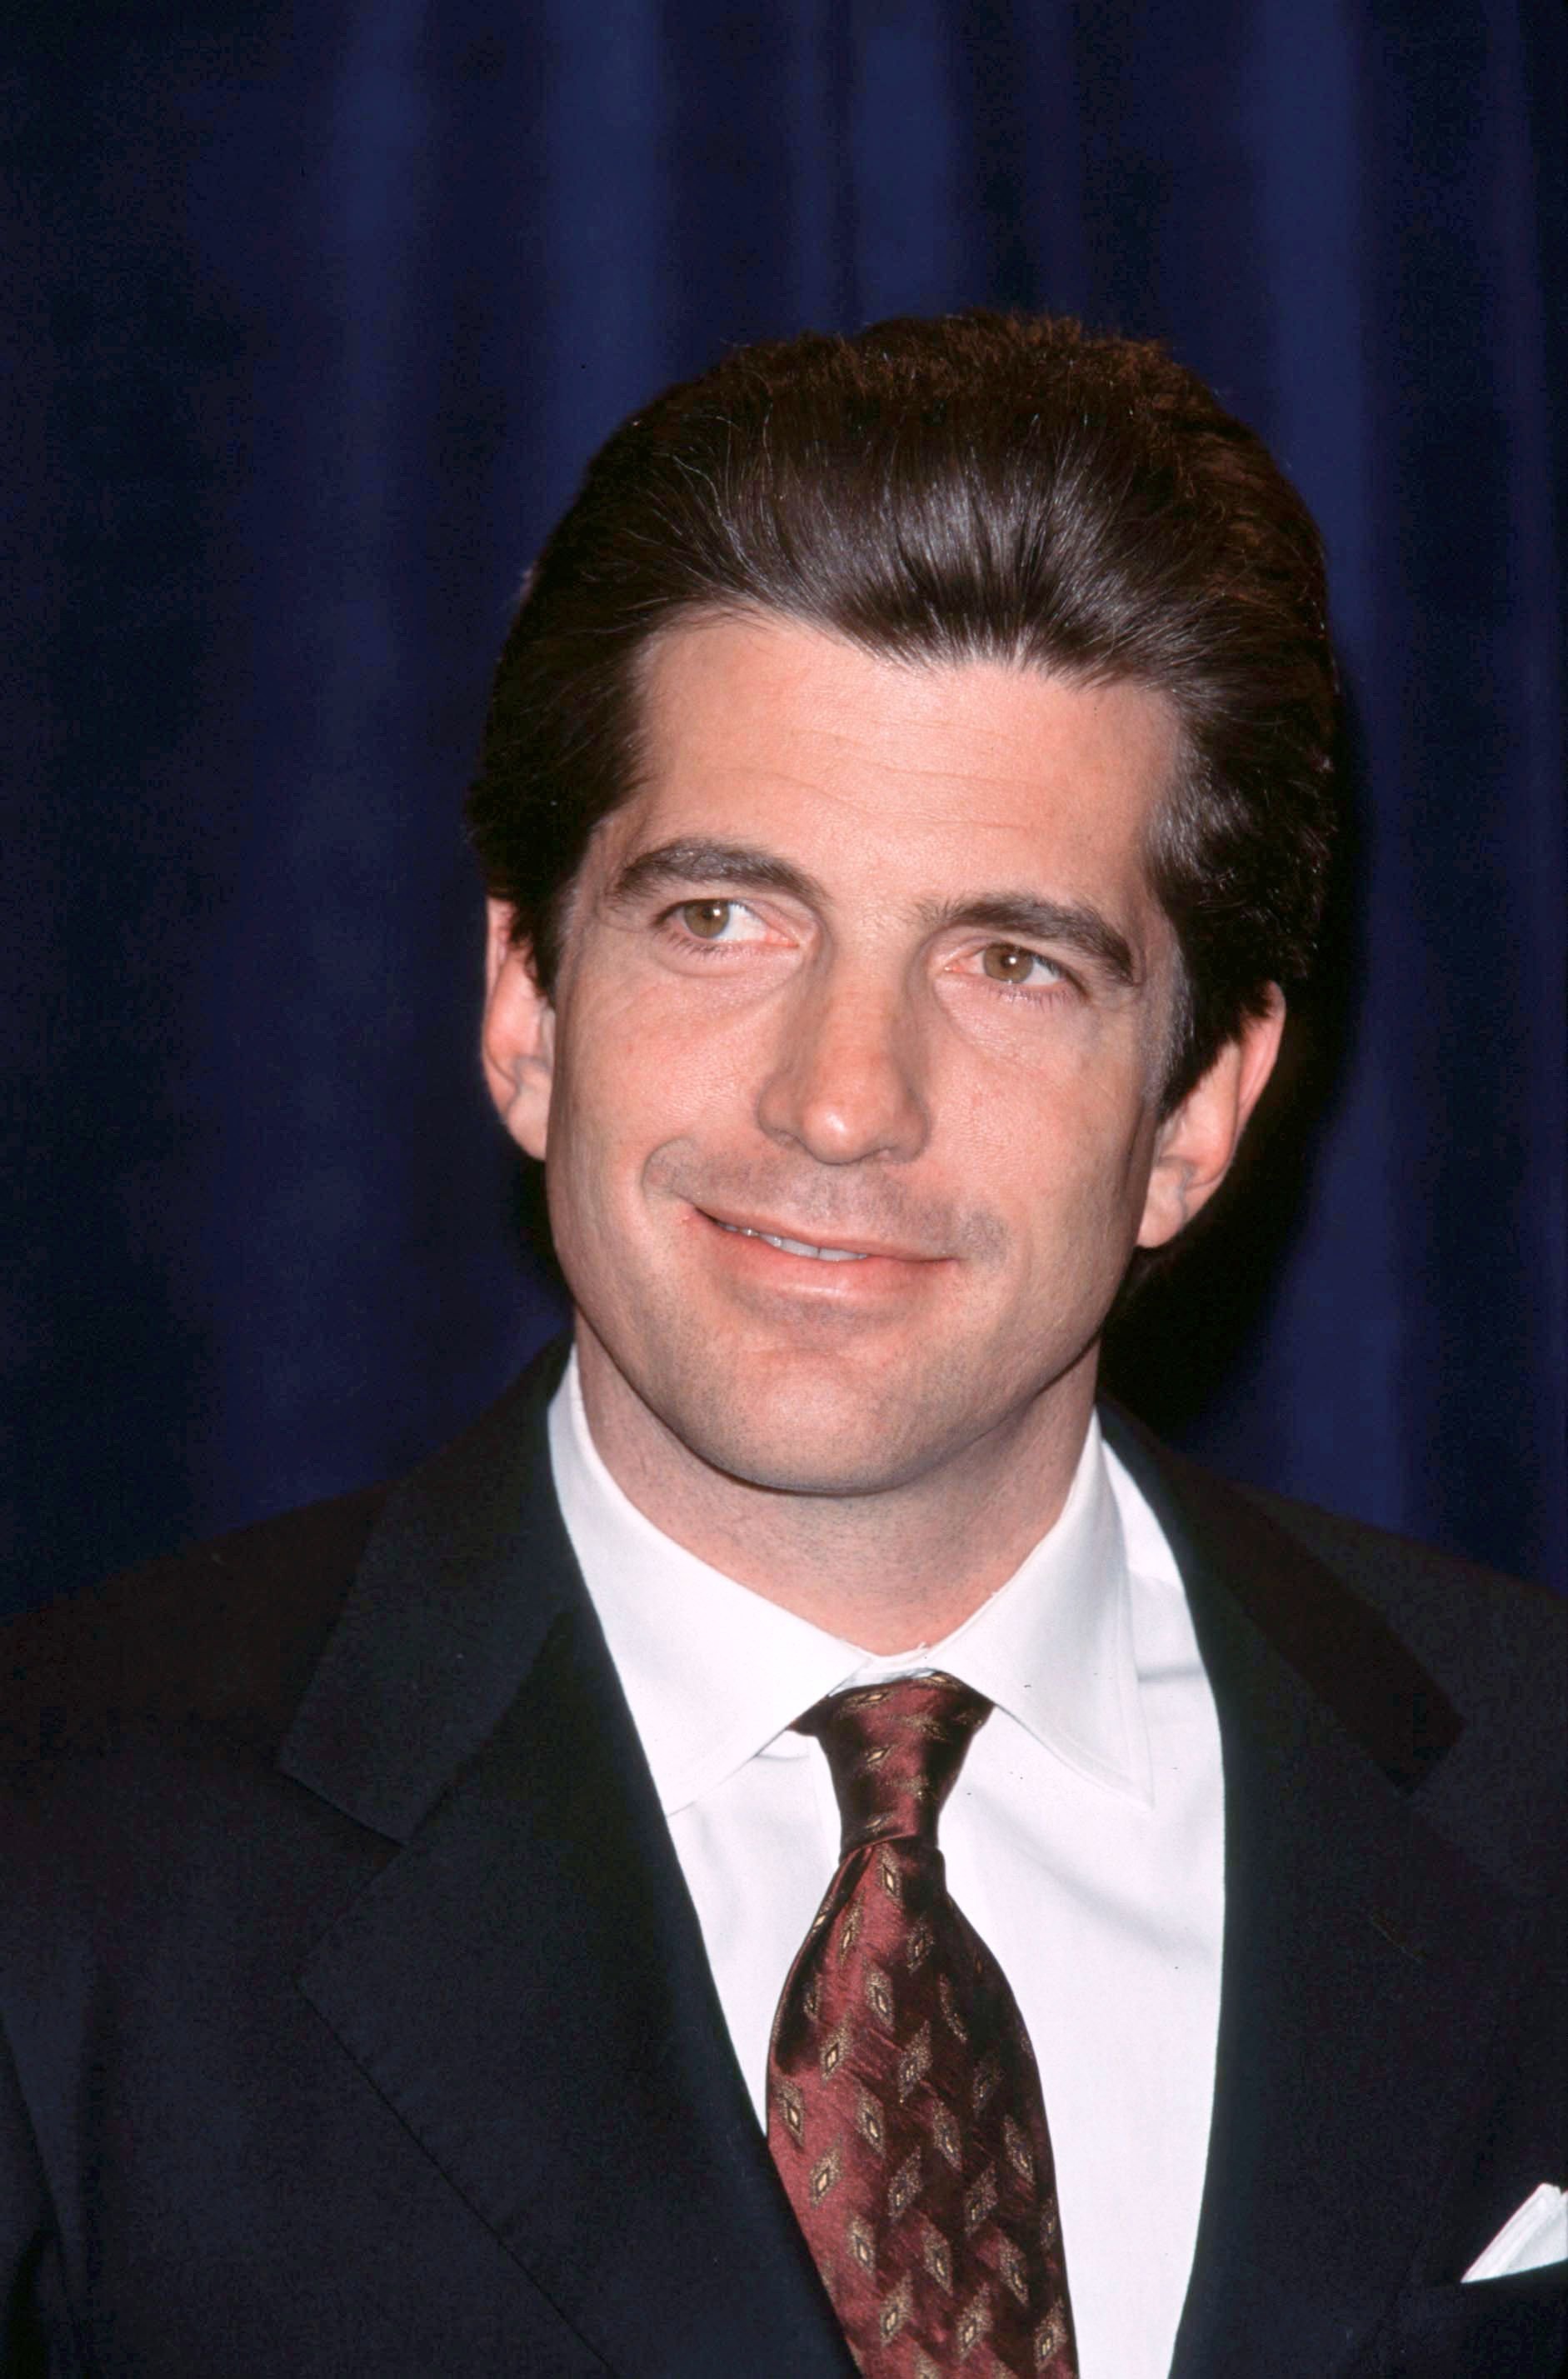 John Kennedy Jr. announces endowed Jackie Robinson Scholarship, at the Jackie Robinson Foundation Dinner, Waldorf-Astoria Hotel | Photo: Getty Images